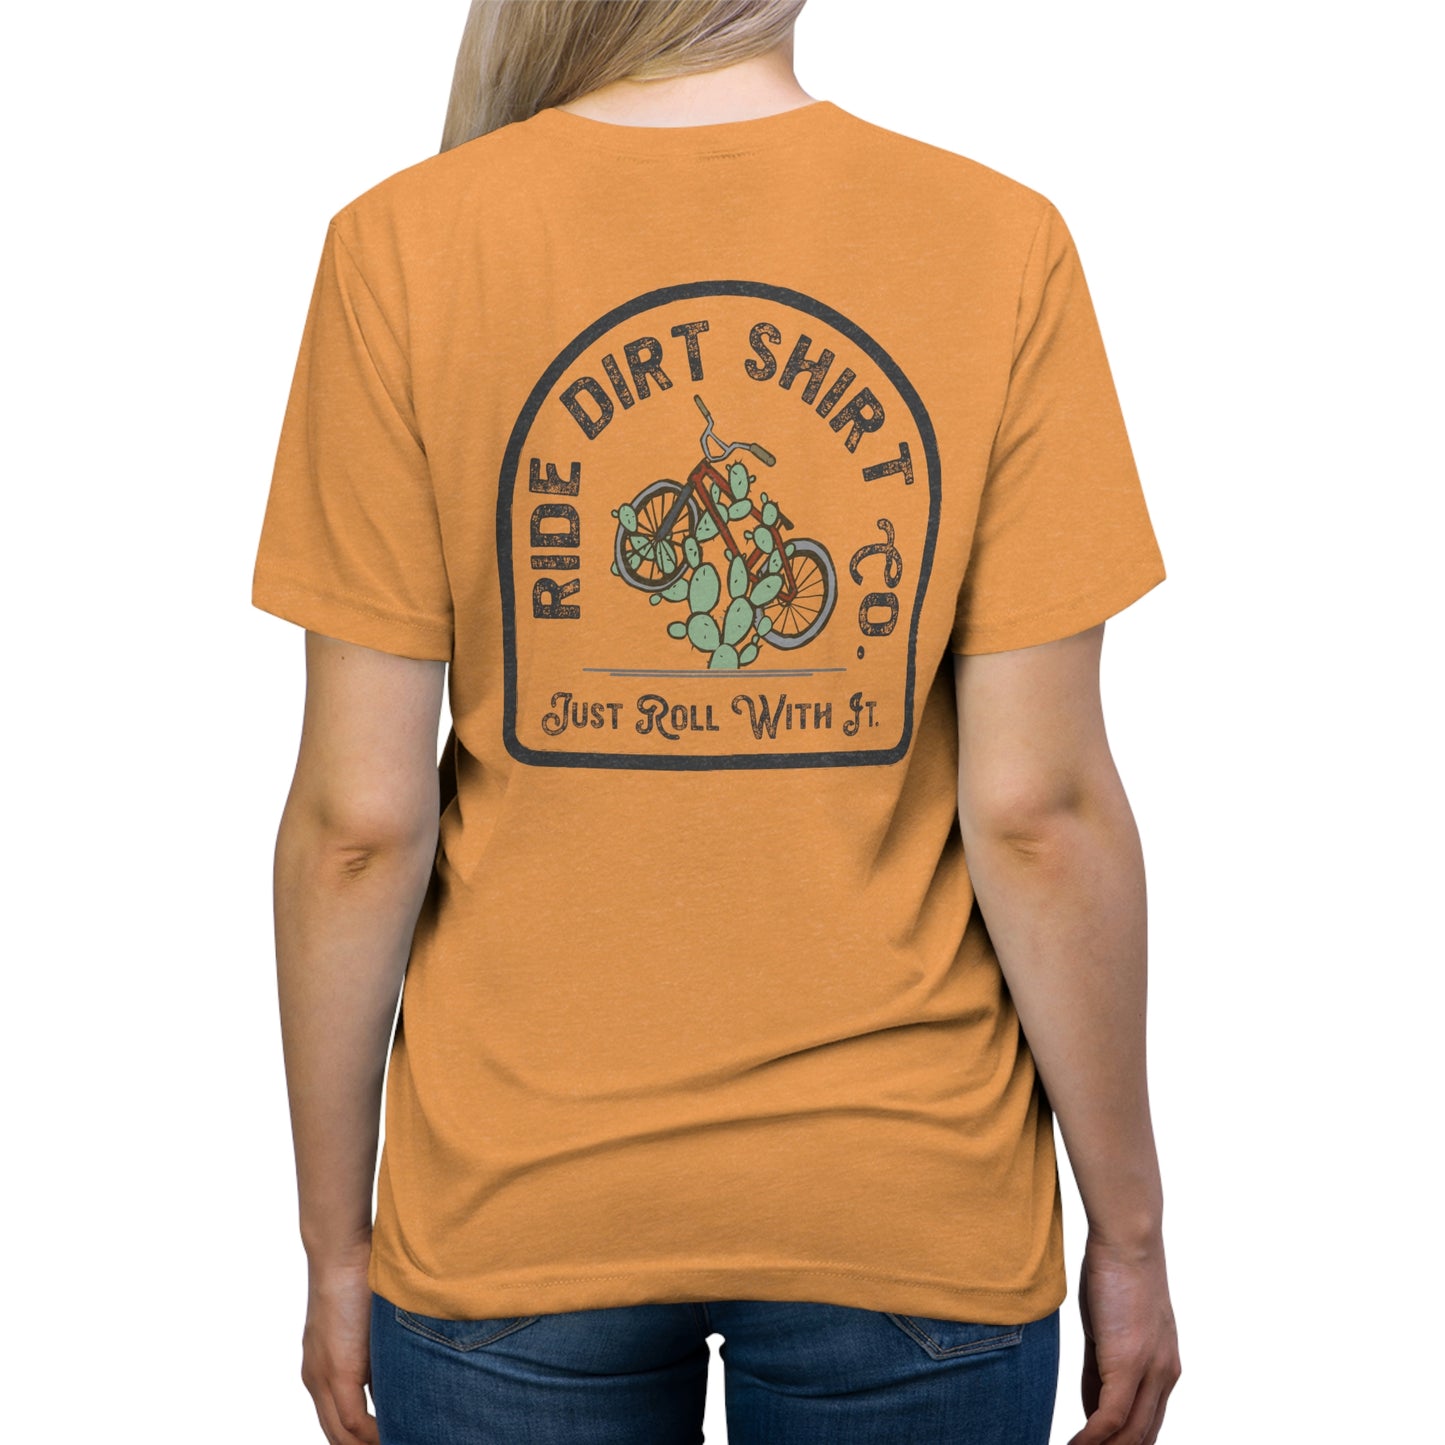 In the Patch Again T-Shirt